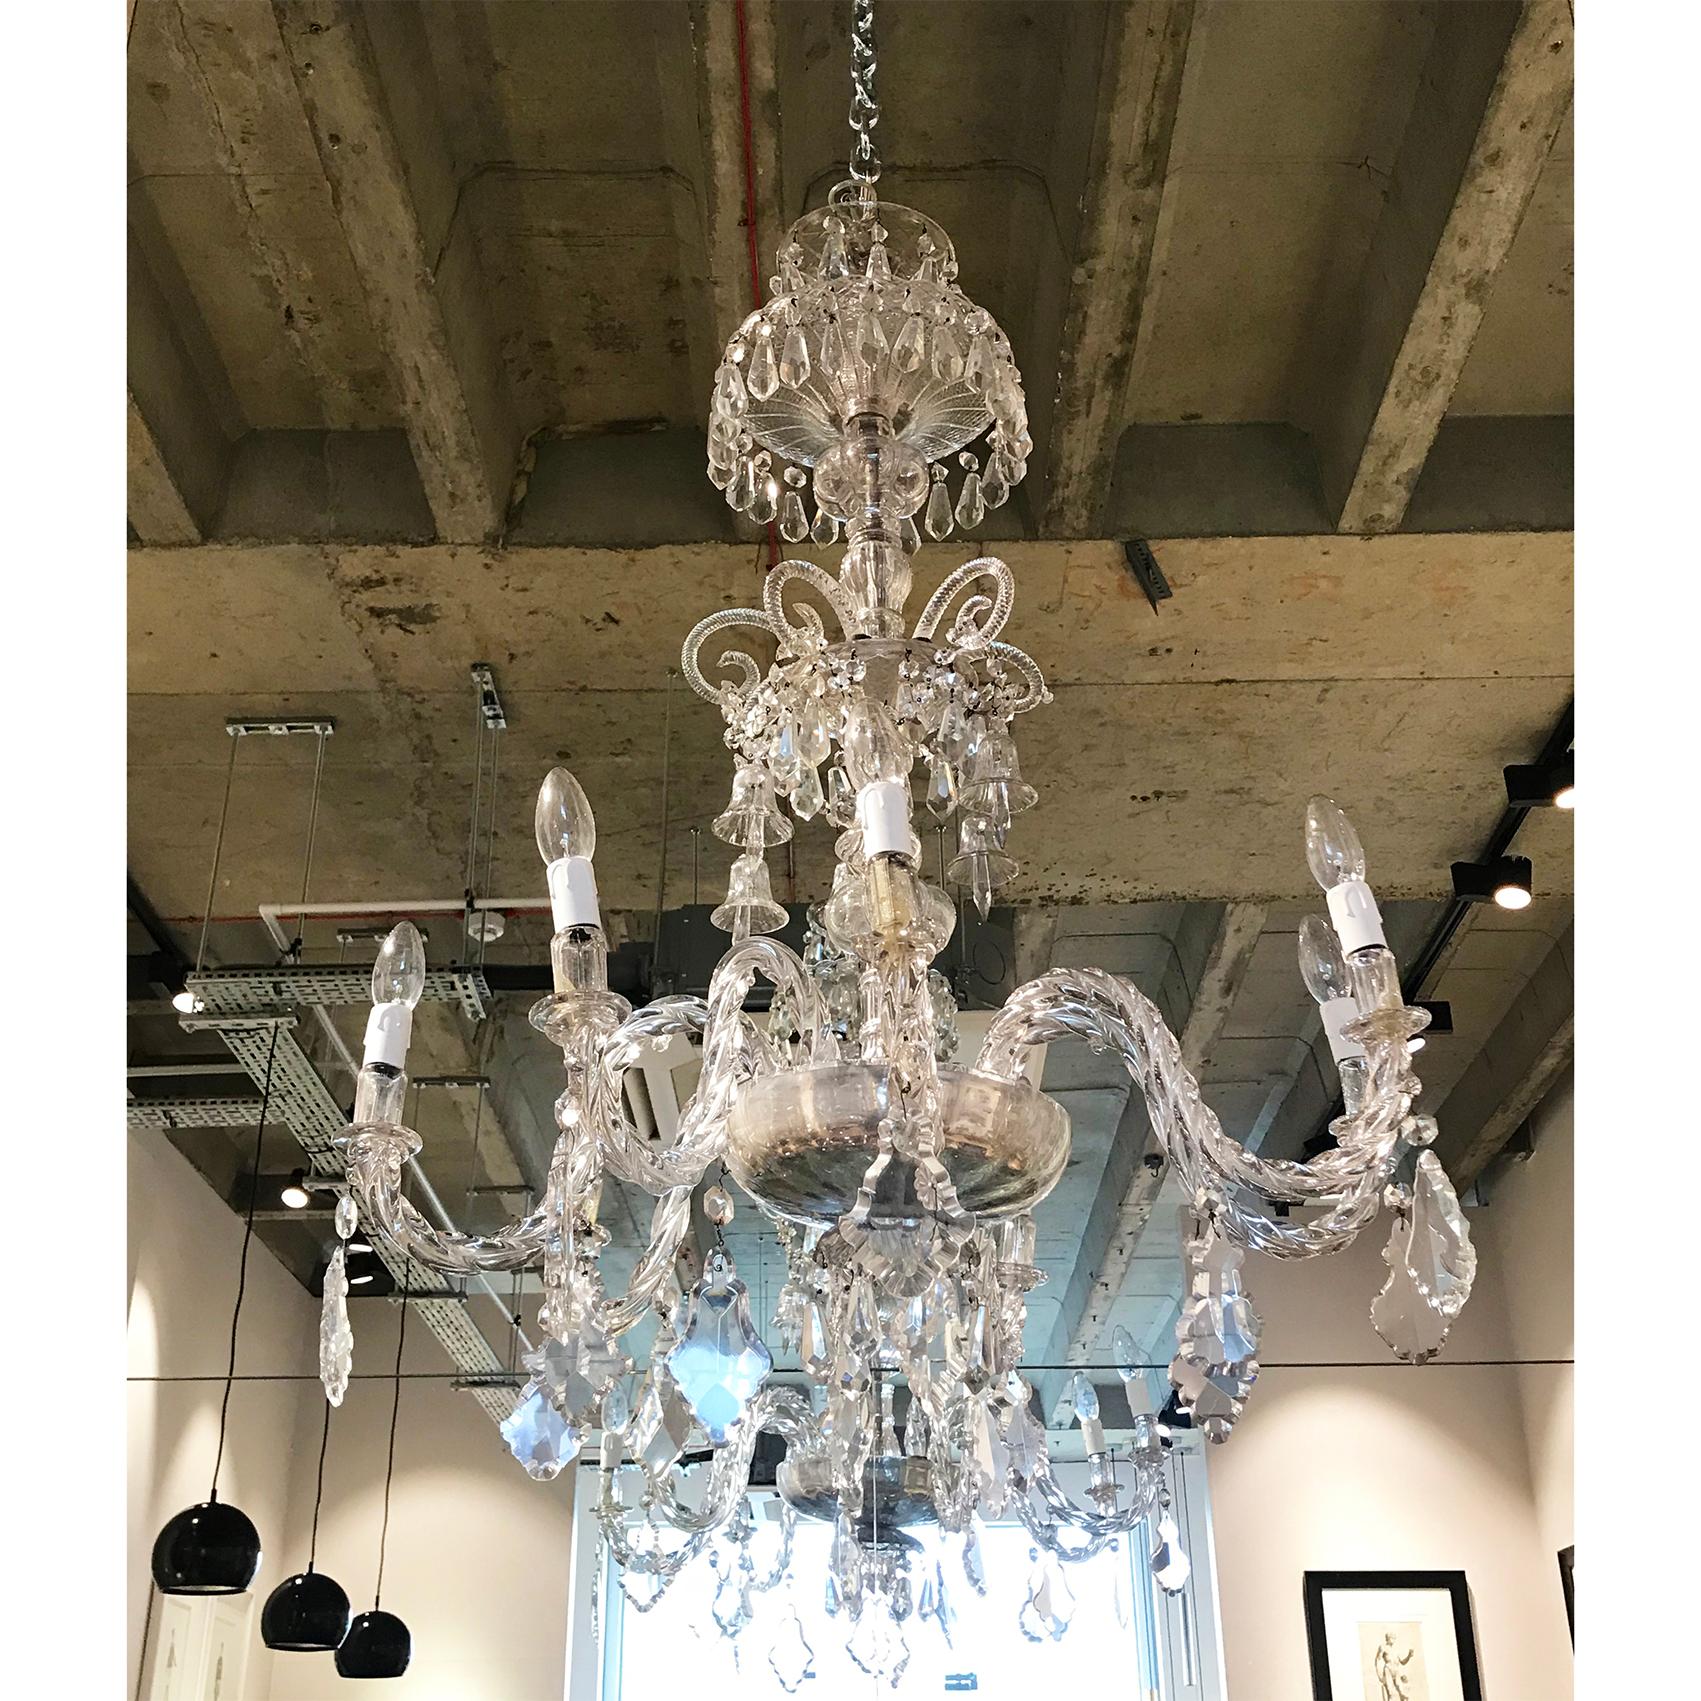 1910s Murano glass chandelier. This elegant piece was produced by Italian specialists and features 8 arms with finely cut crystal detailing around the three tiers.

70Dia x 110H cm